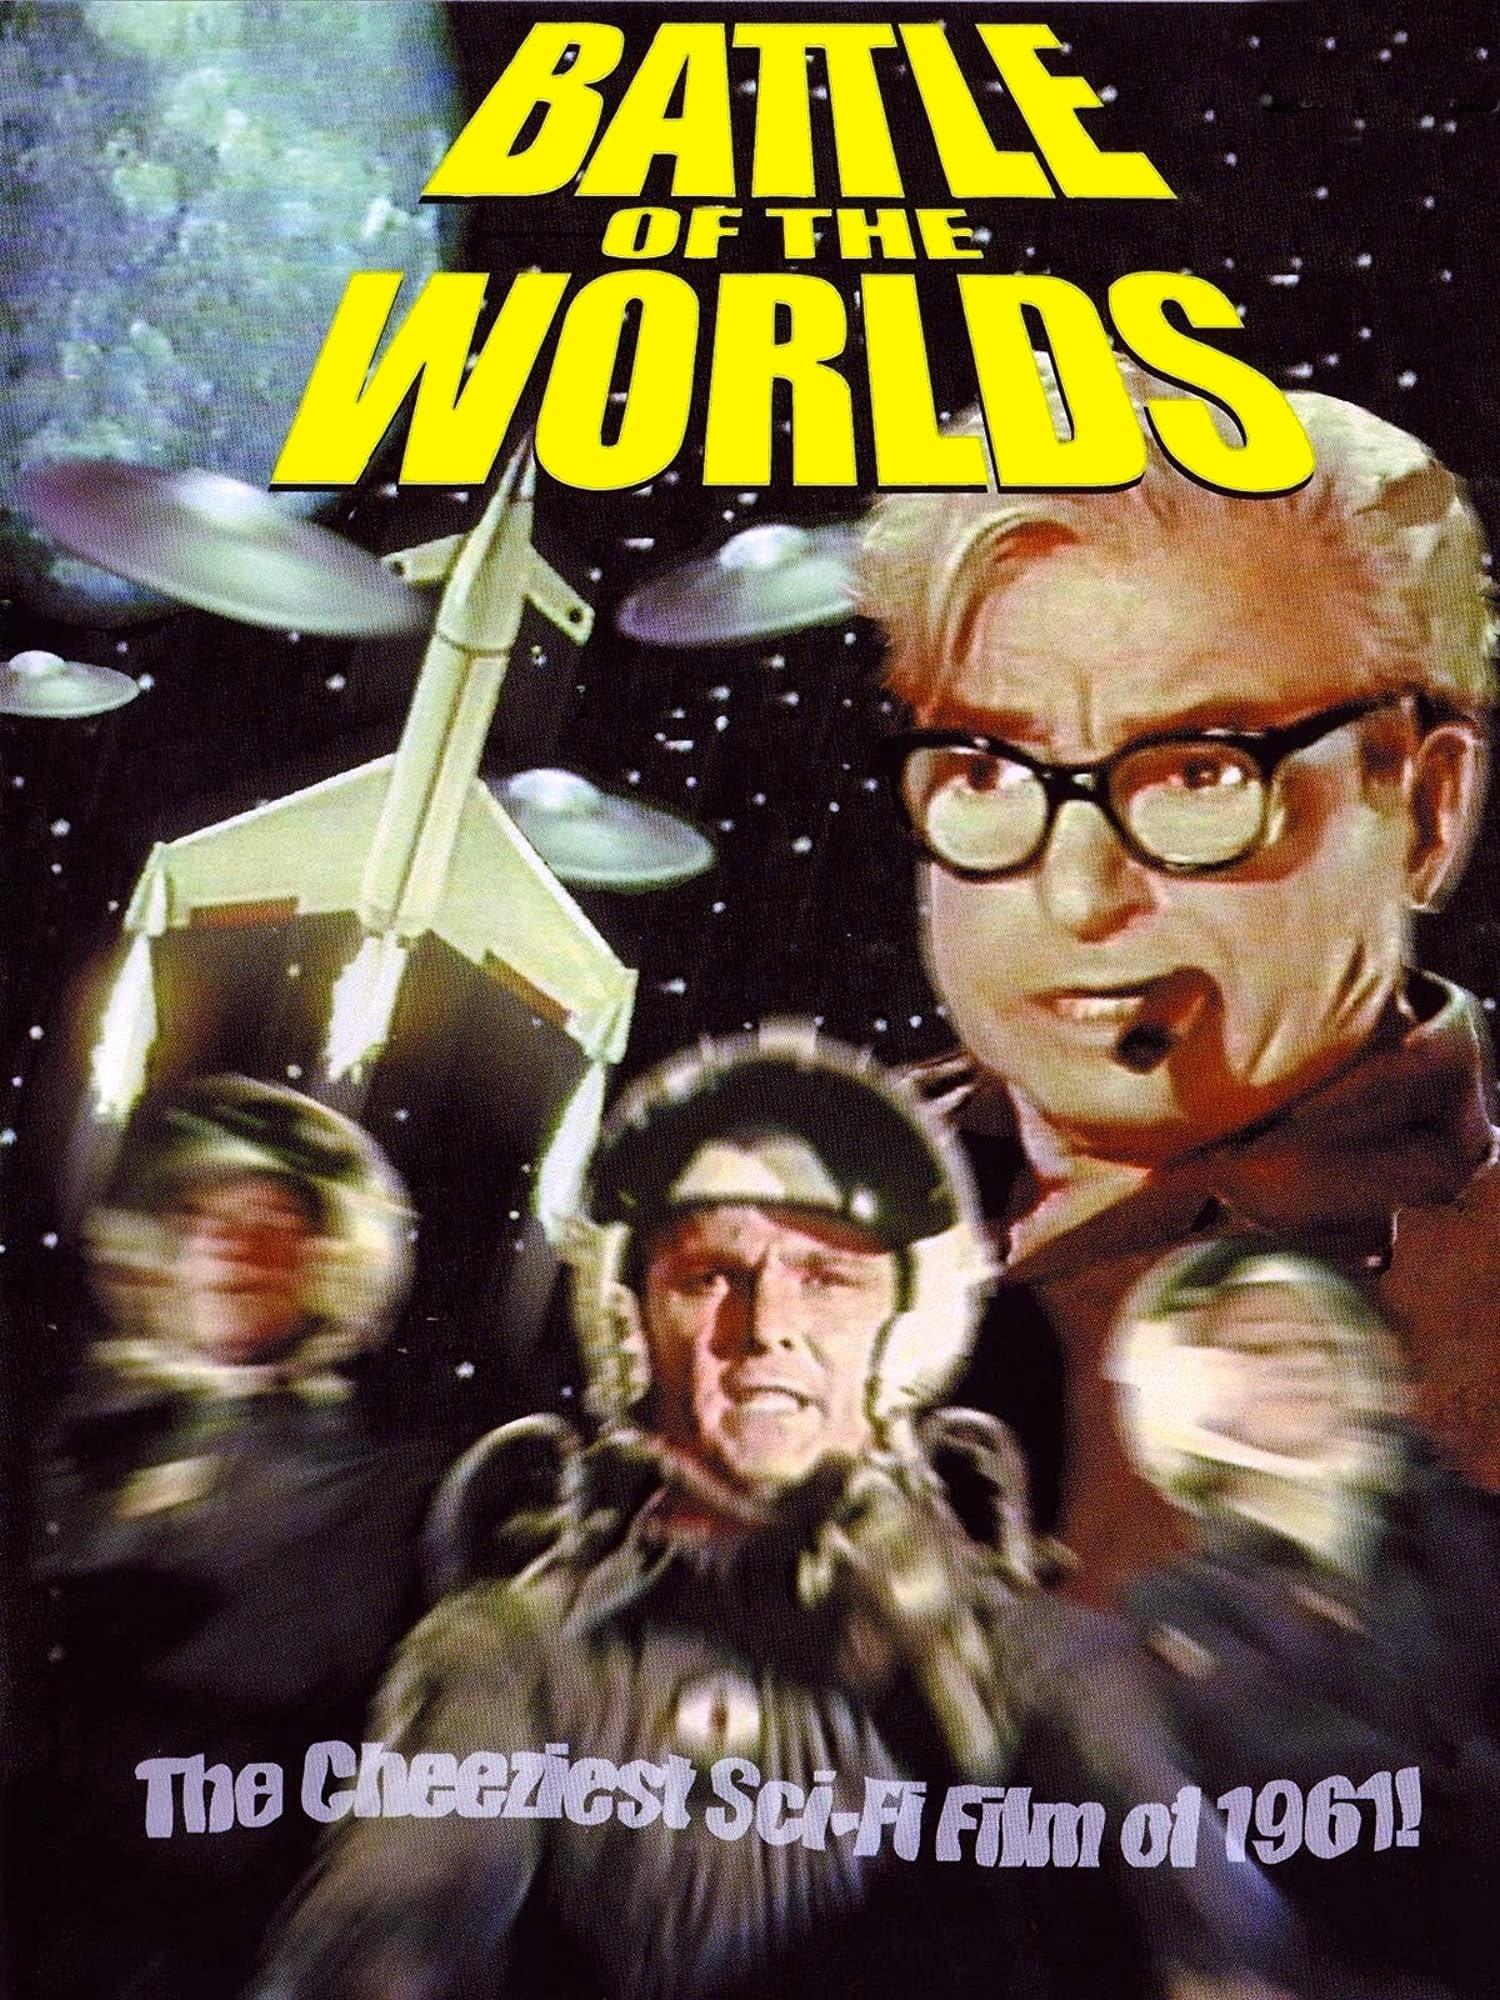 Battle of the Worlds poster